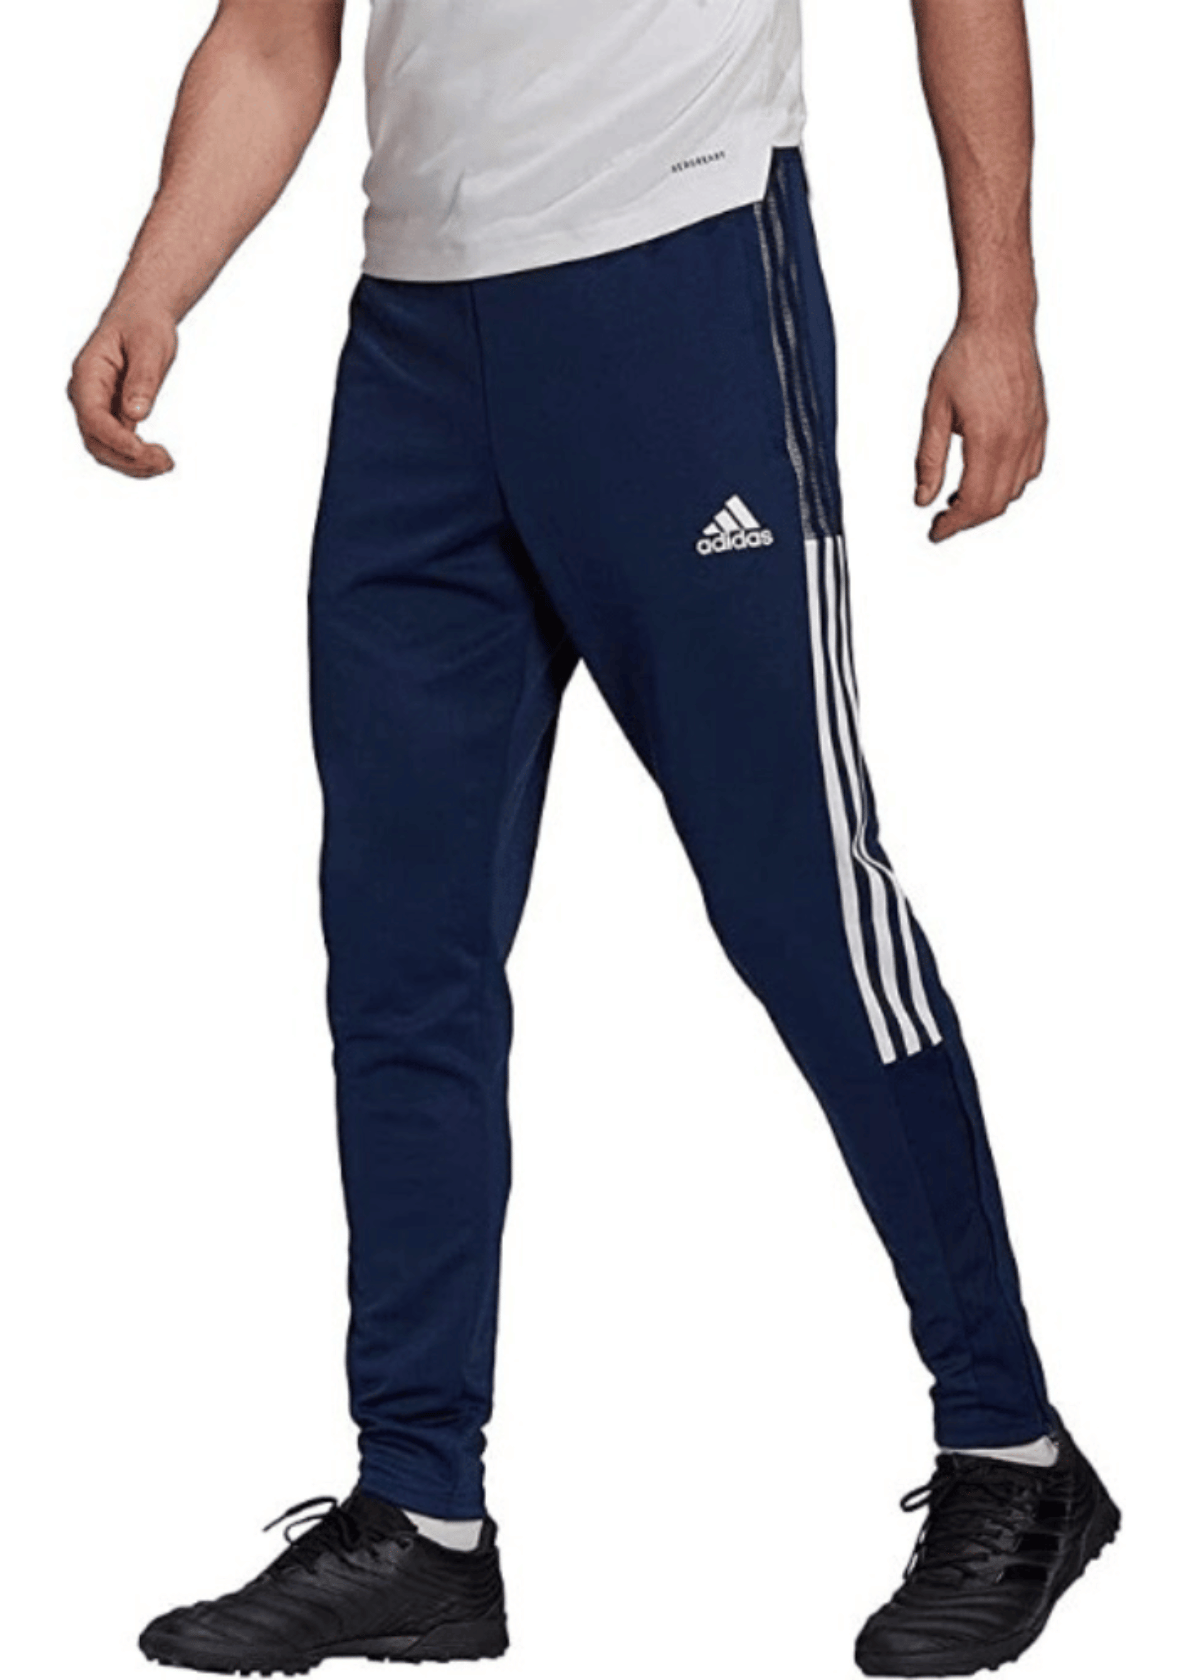 The Best Soccer Pants Men Like to Wear - Lifestyle Report